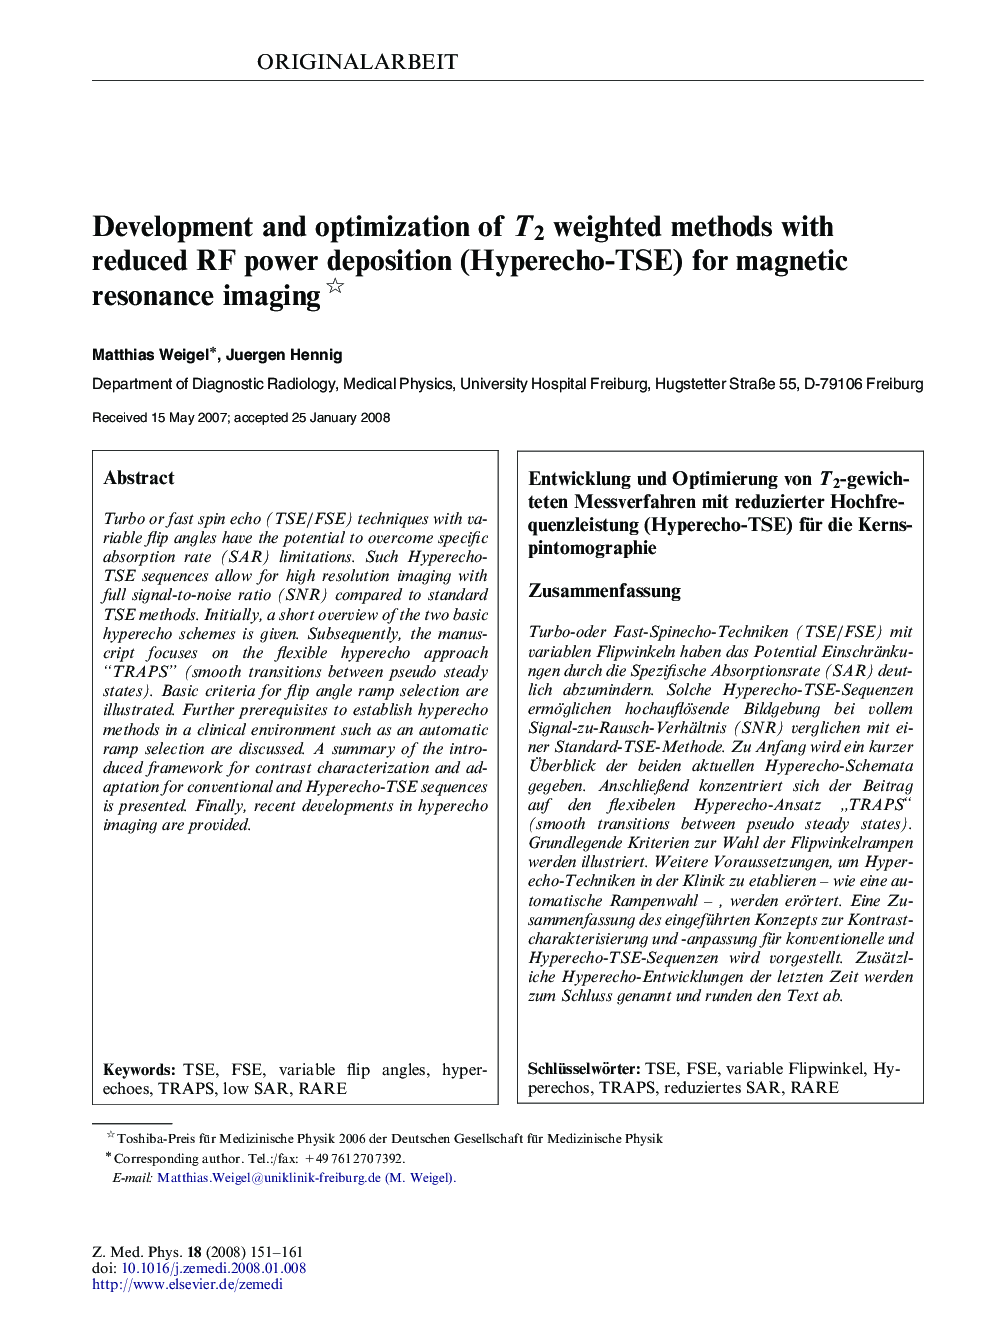 Development and optimization of T2T2 weighted methods with reduced RF power deposition (Hyperecho-TSE) for magnetic resonance imaging 